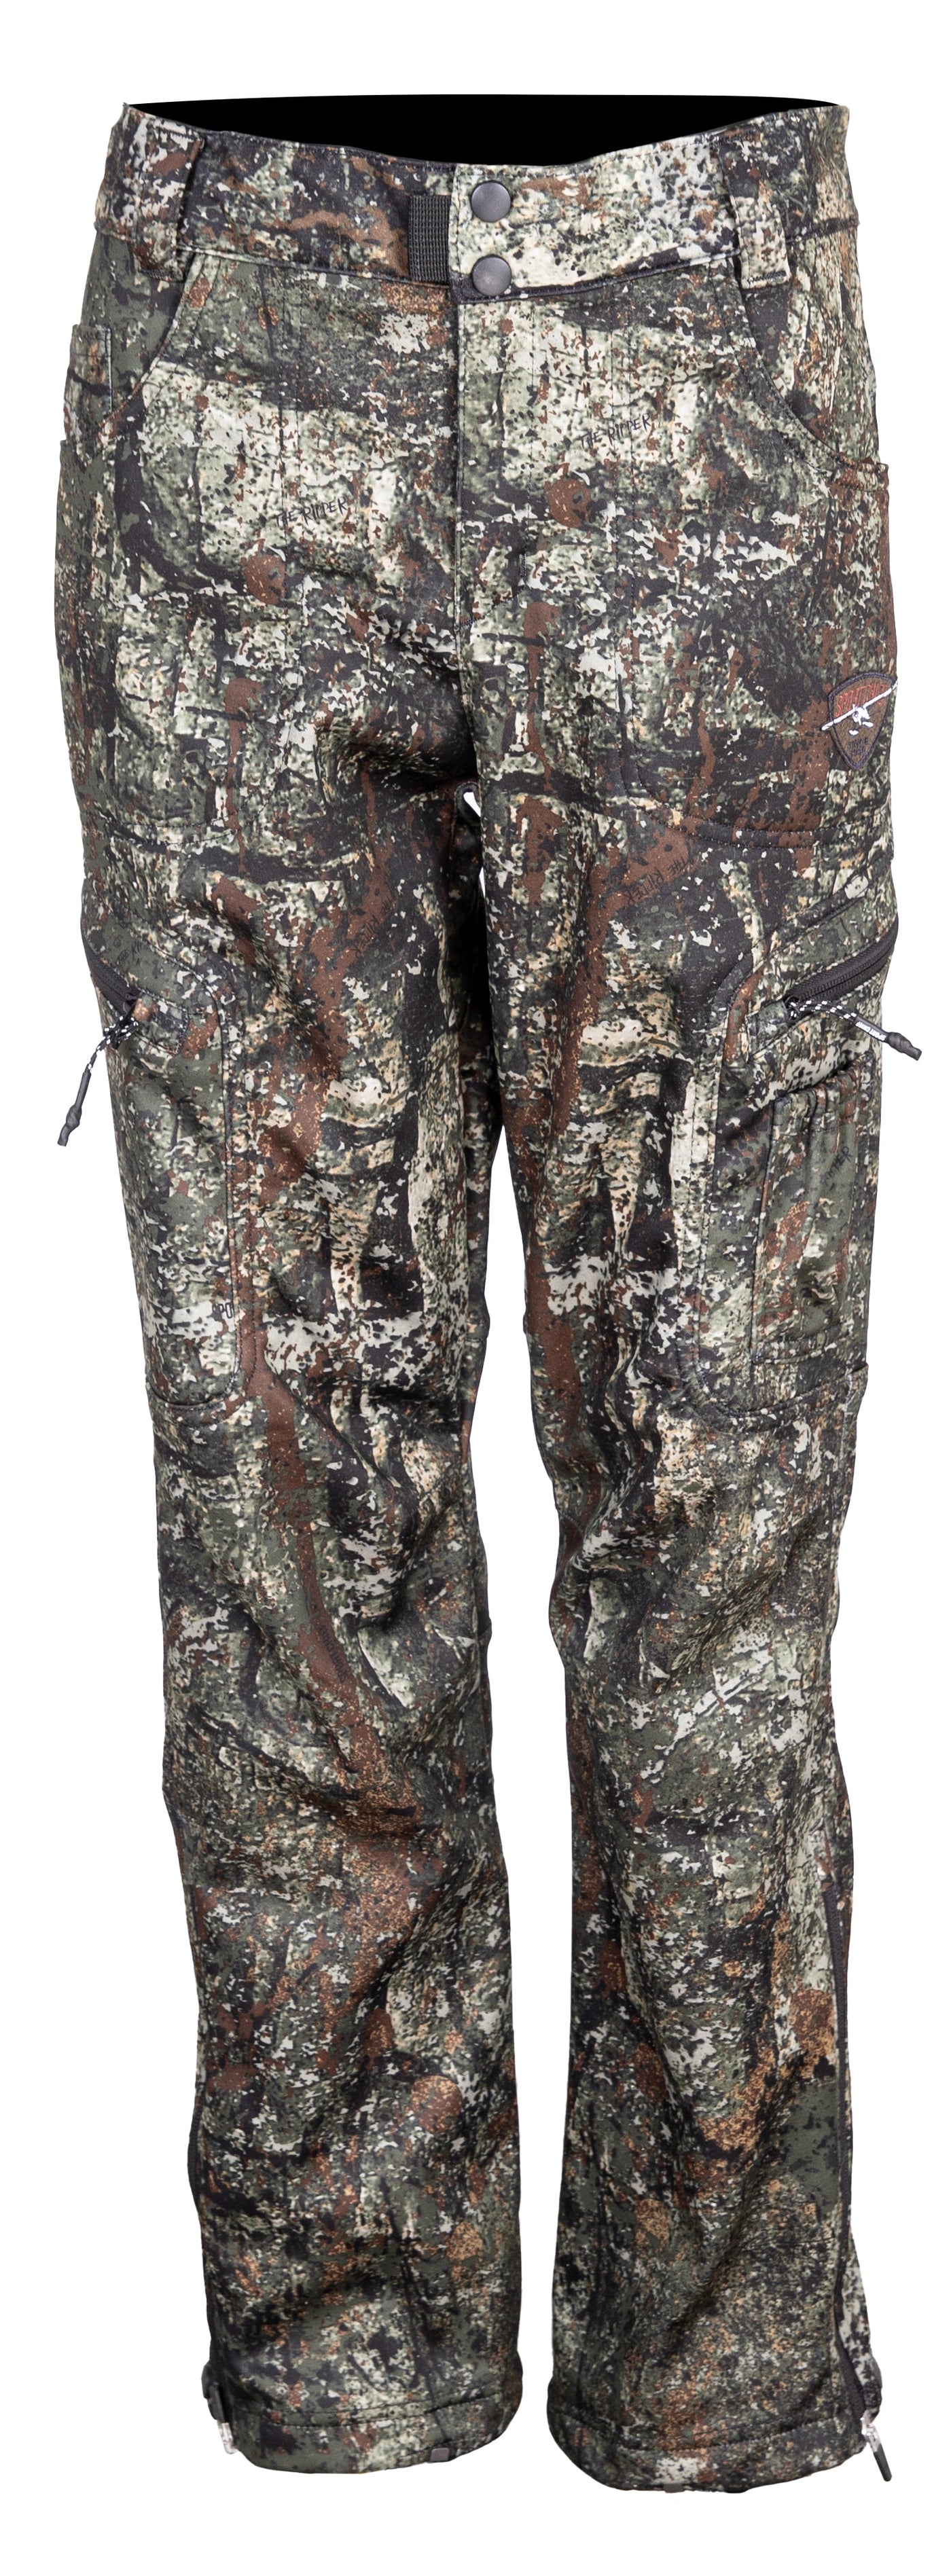 Women's hunting camo pants Jason T. Morneau "The Hunting Beast" Collection - Sportchief